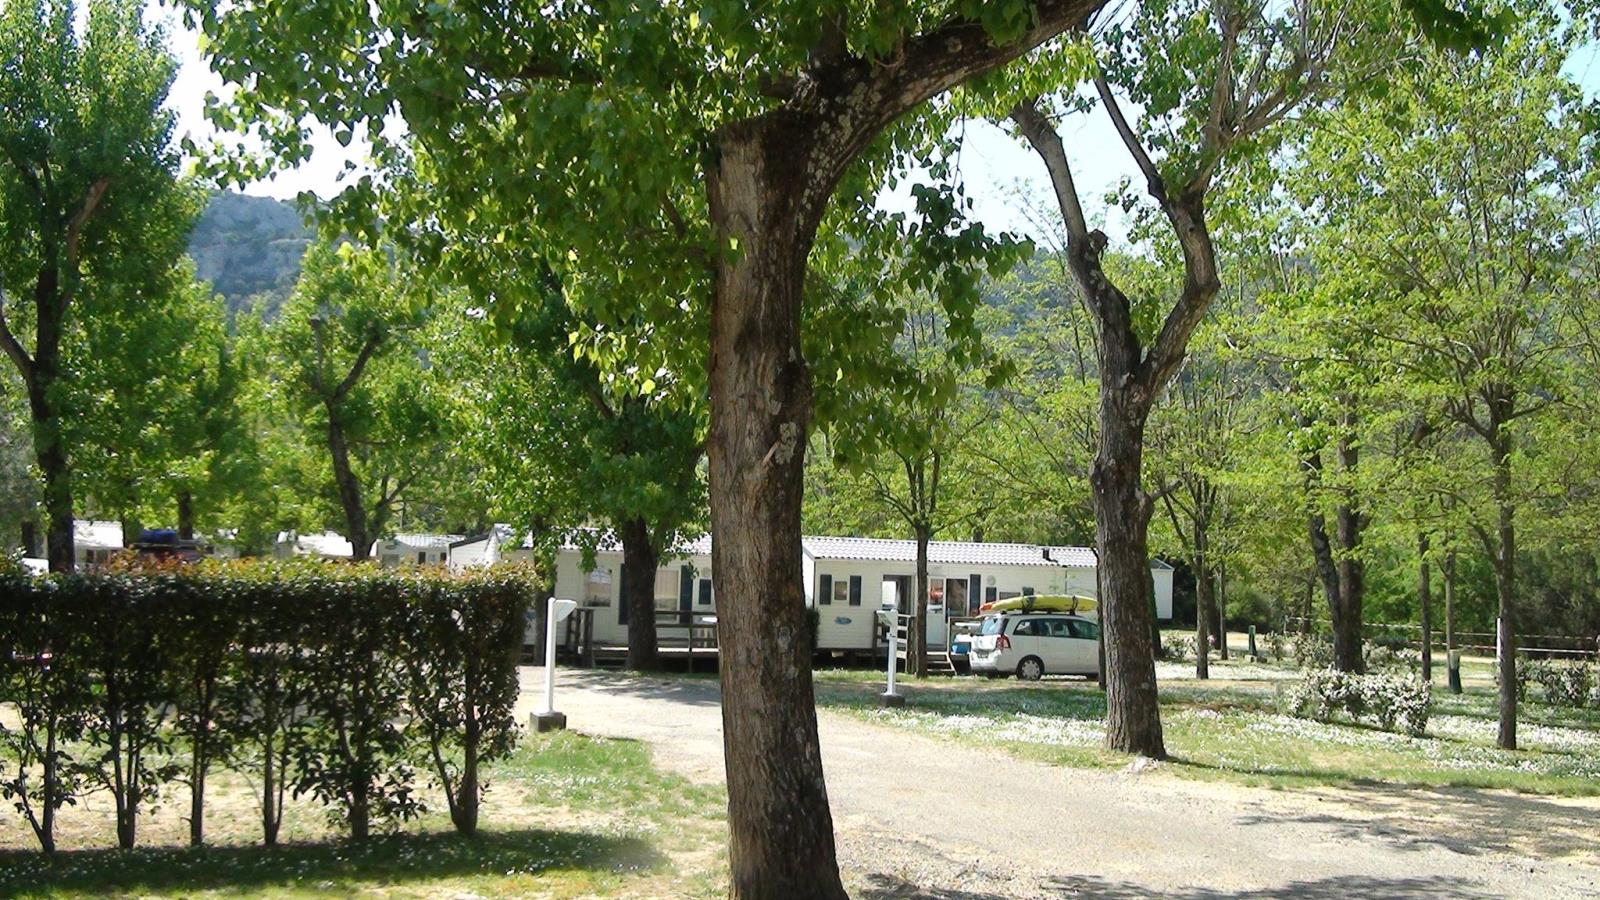 Accommodation - Mobilhome Comfort With Air Conditioned  2 Bedrooms Arrival On Saturday (In High Season) Minimum 3 Nights - Camping des Gorges